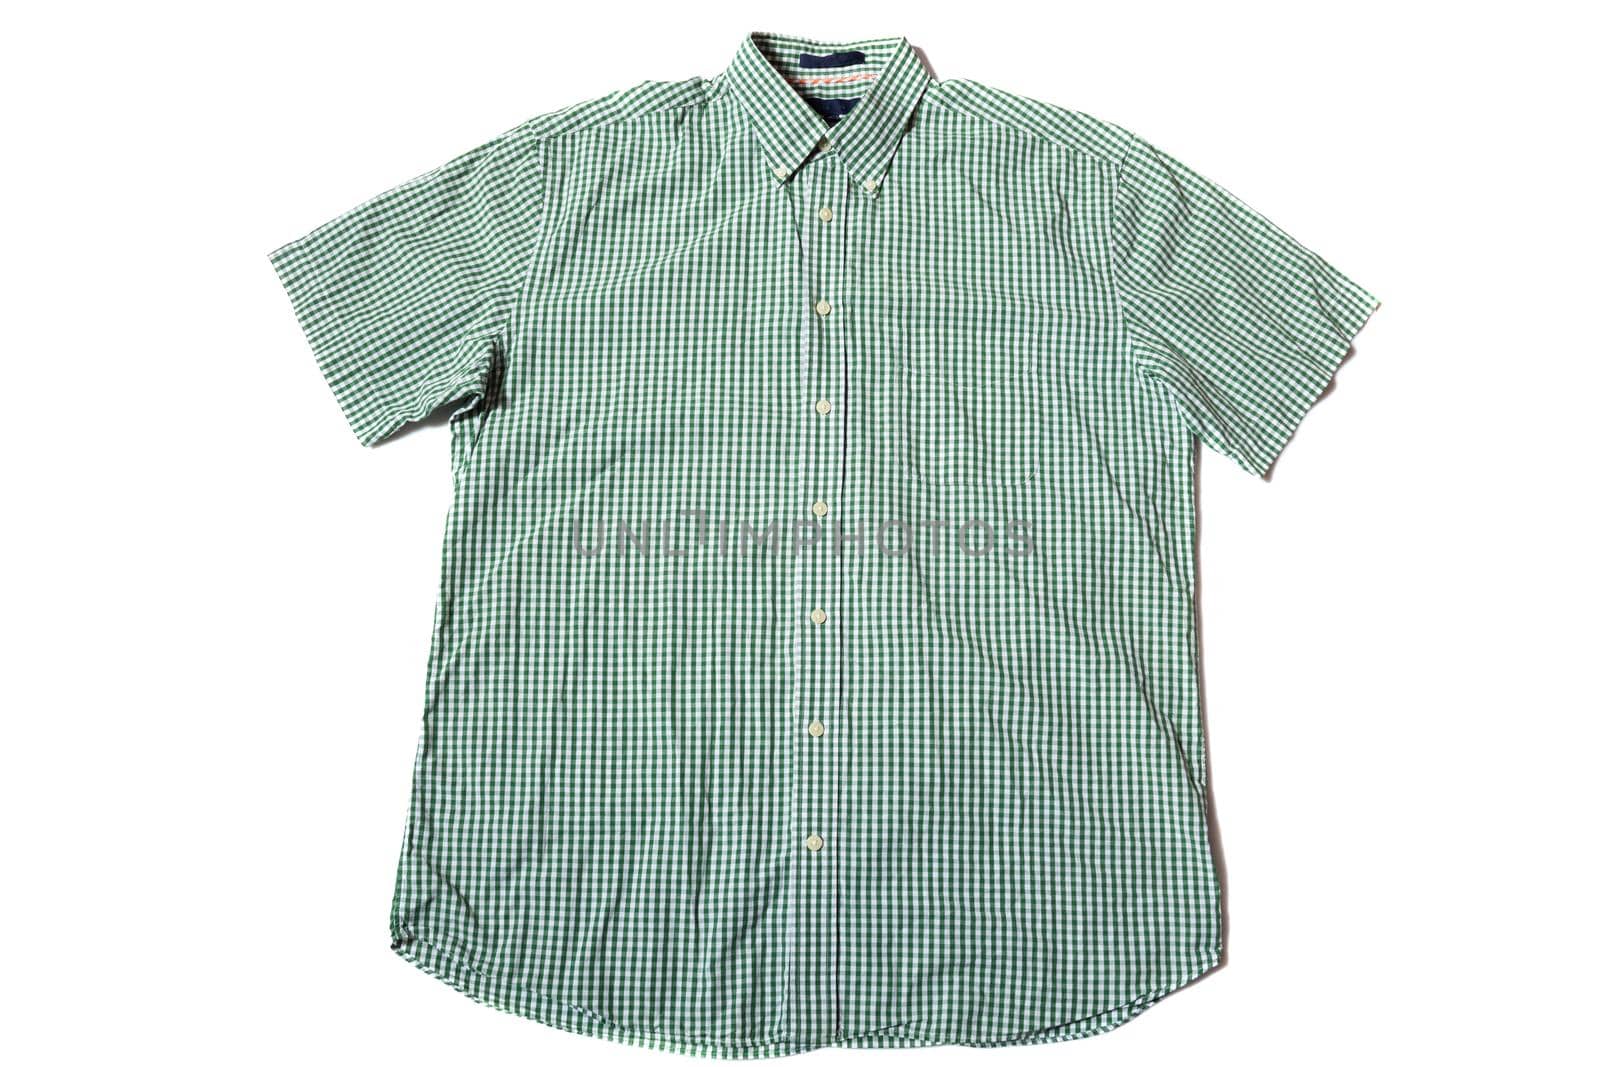 Green Button up short sleeve shirt on white background